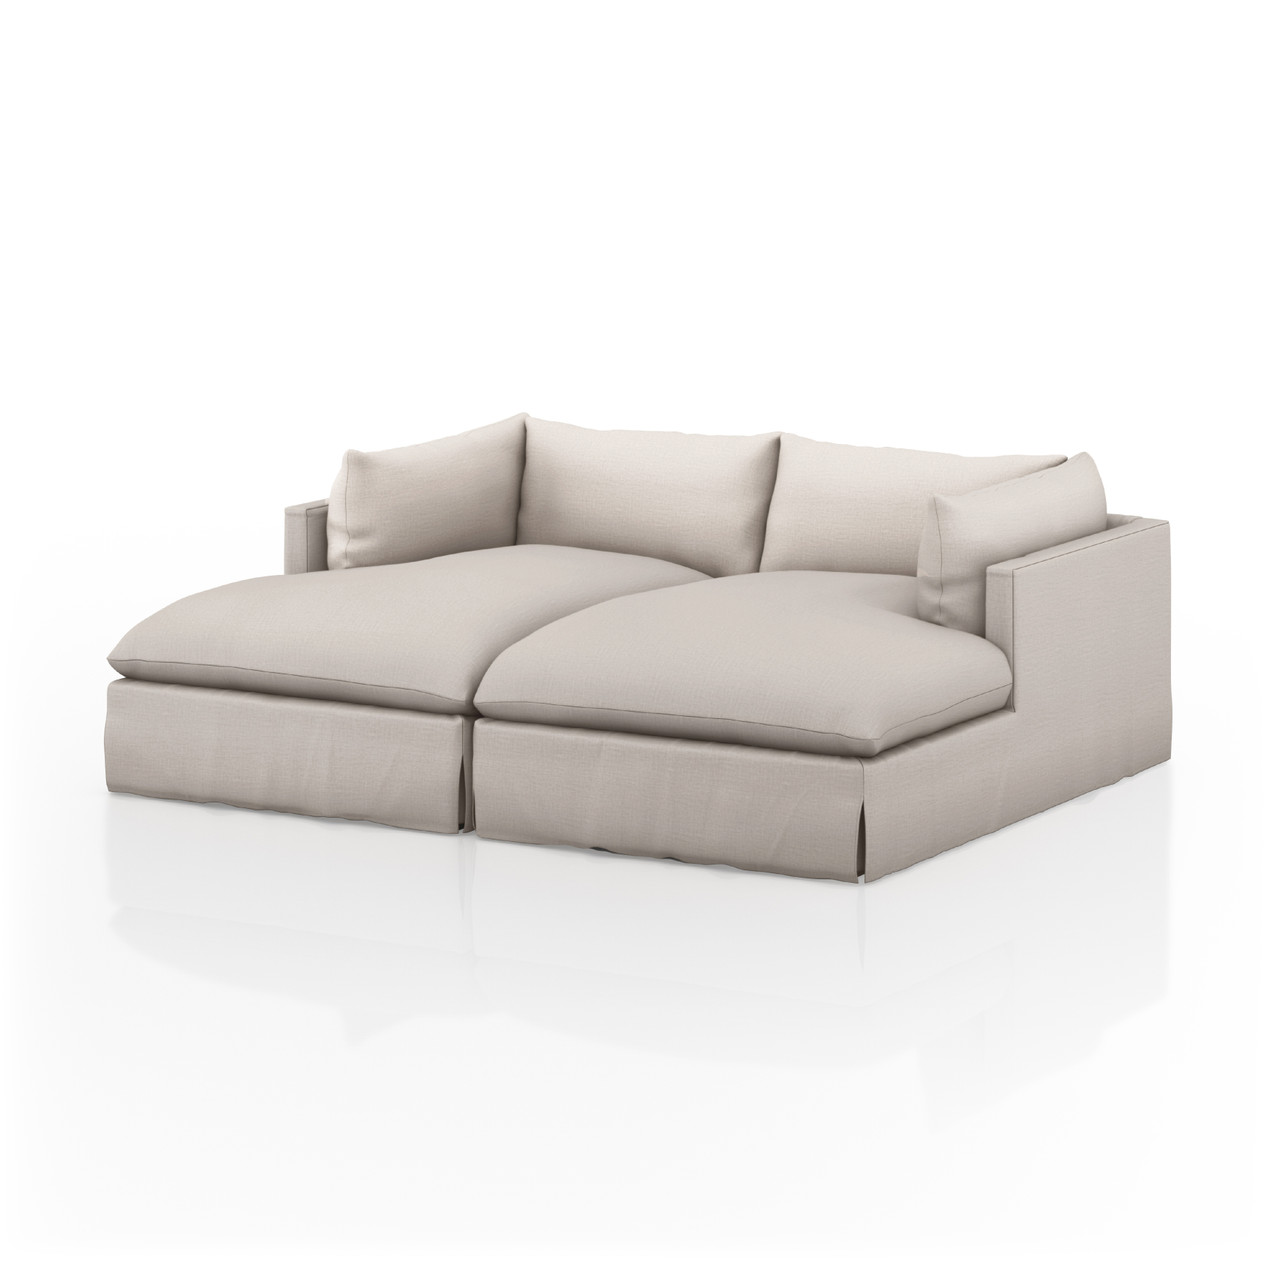 bennett double chaise lounge sofa - Pacific Home Online